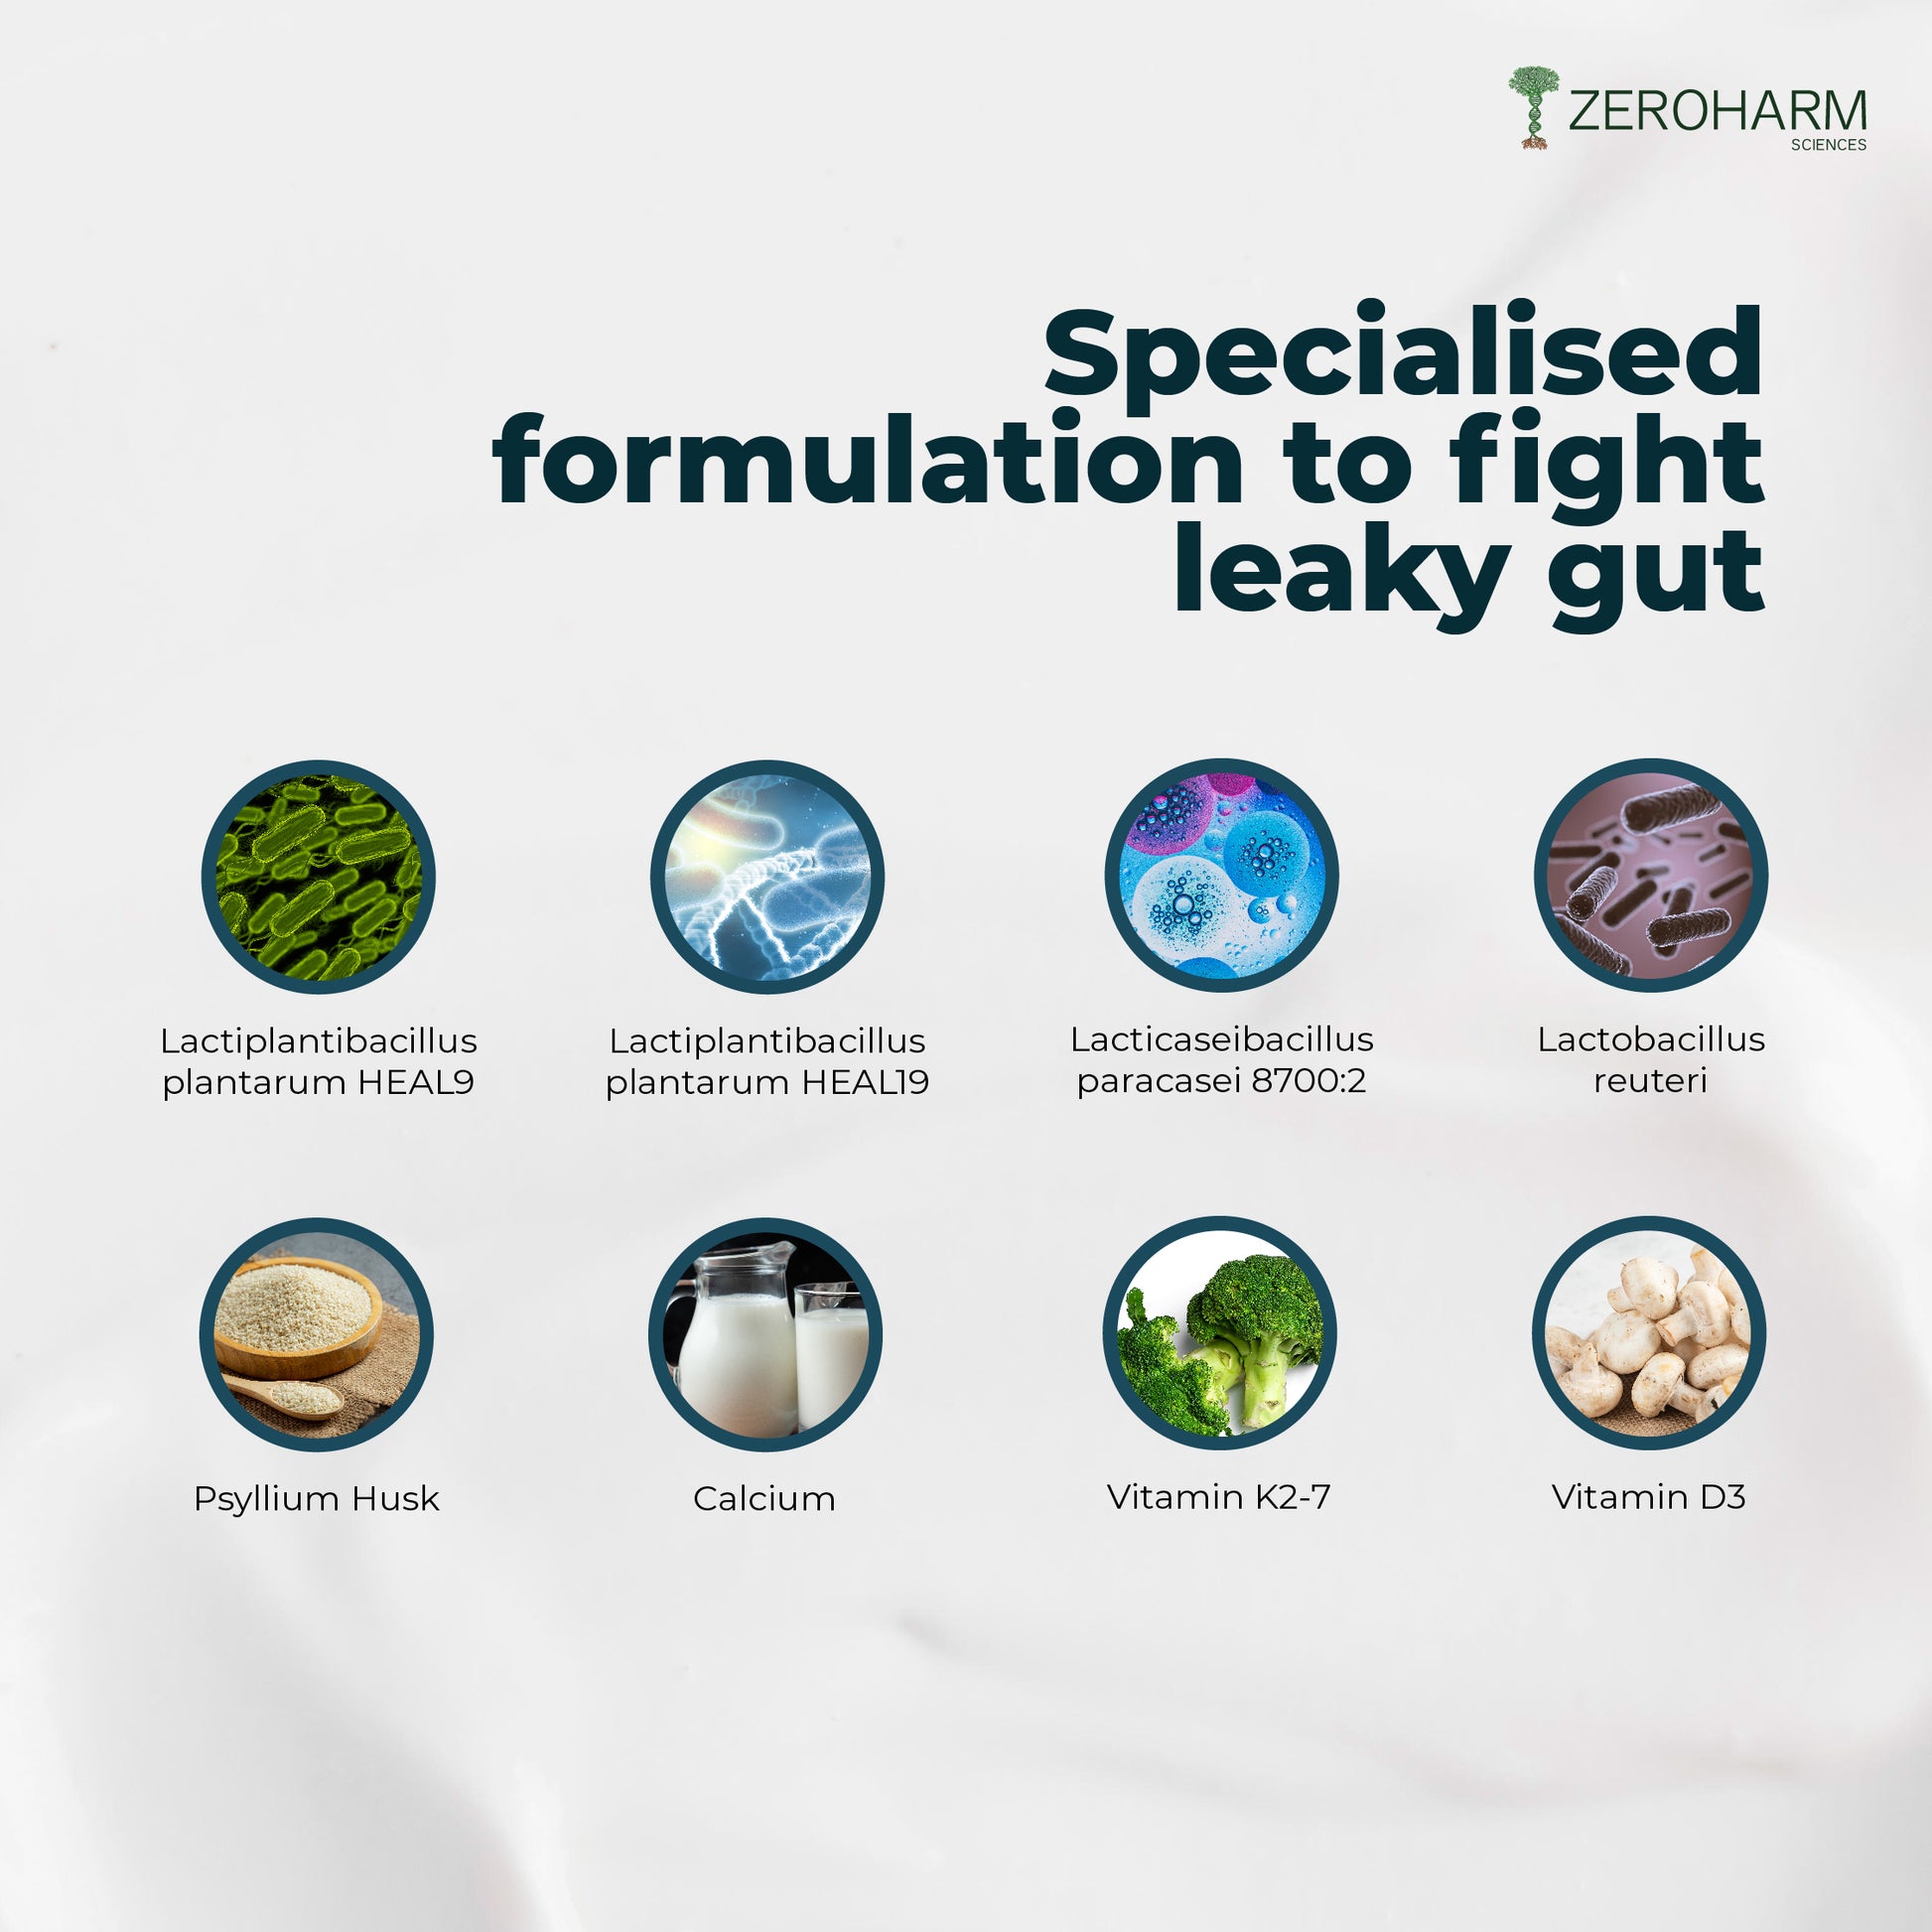 leaky gut tablets made with several probiotic blends and some ingredients like psyllium husk, calcium, vitamin D3, vitamin K2-7